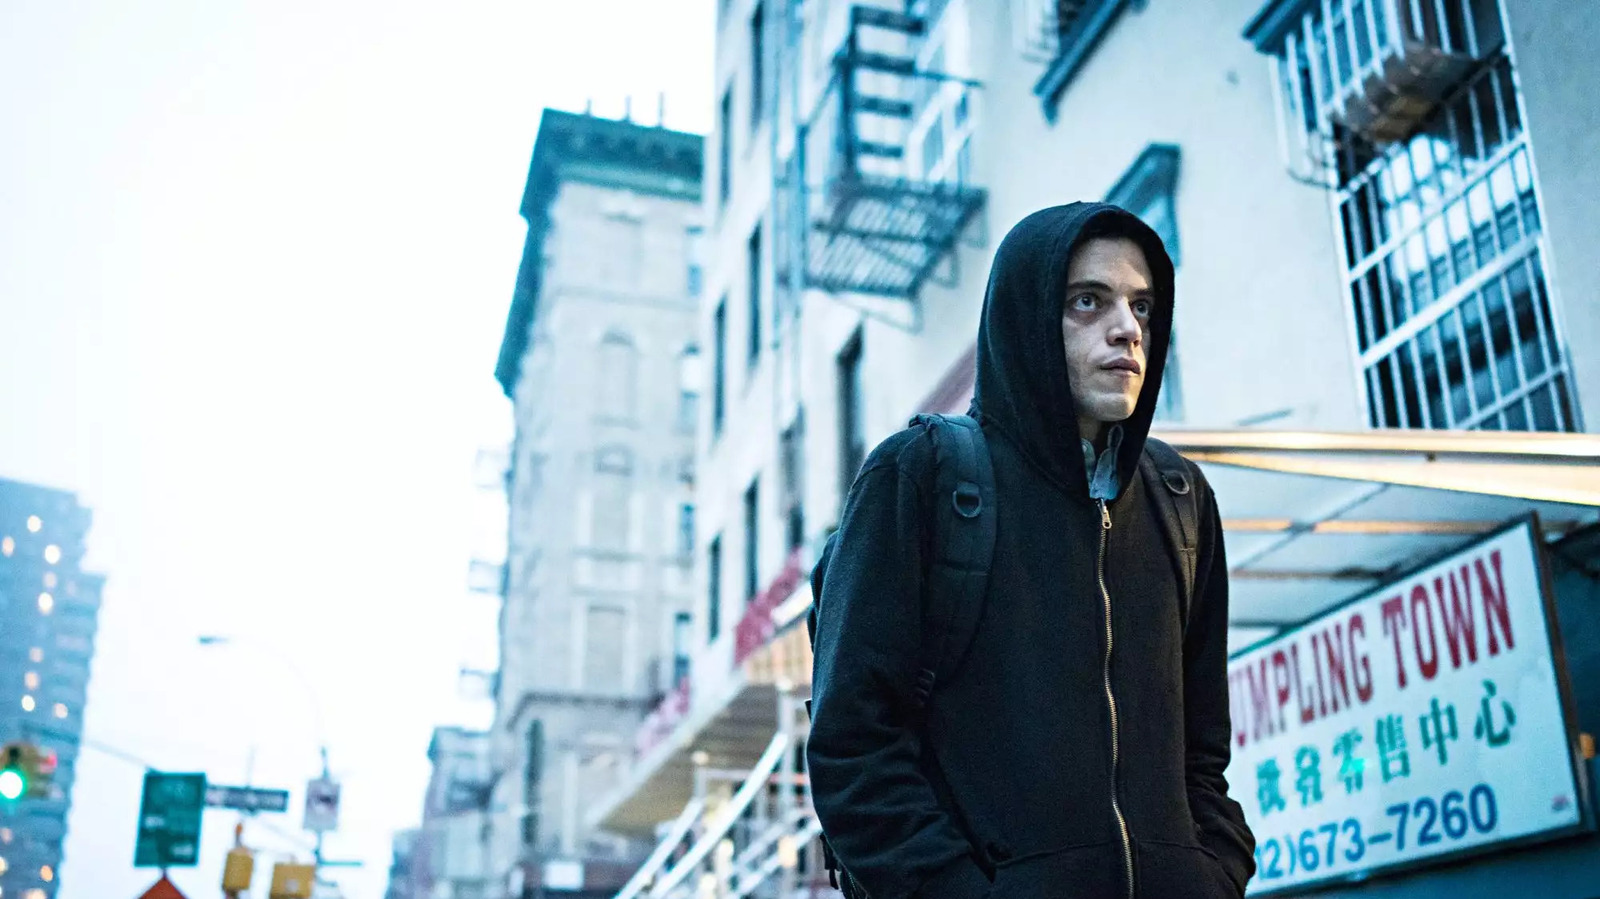 Mr. Robot - TV's most buzzed about series